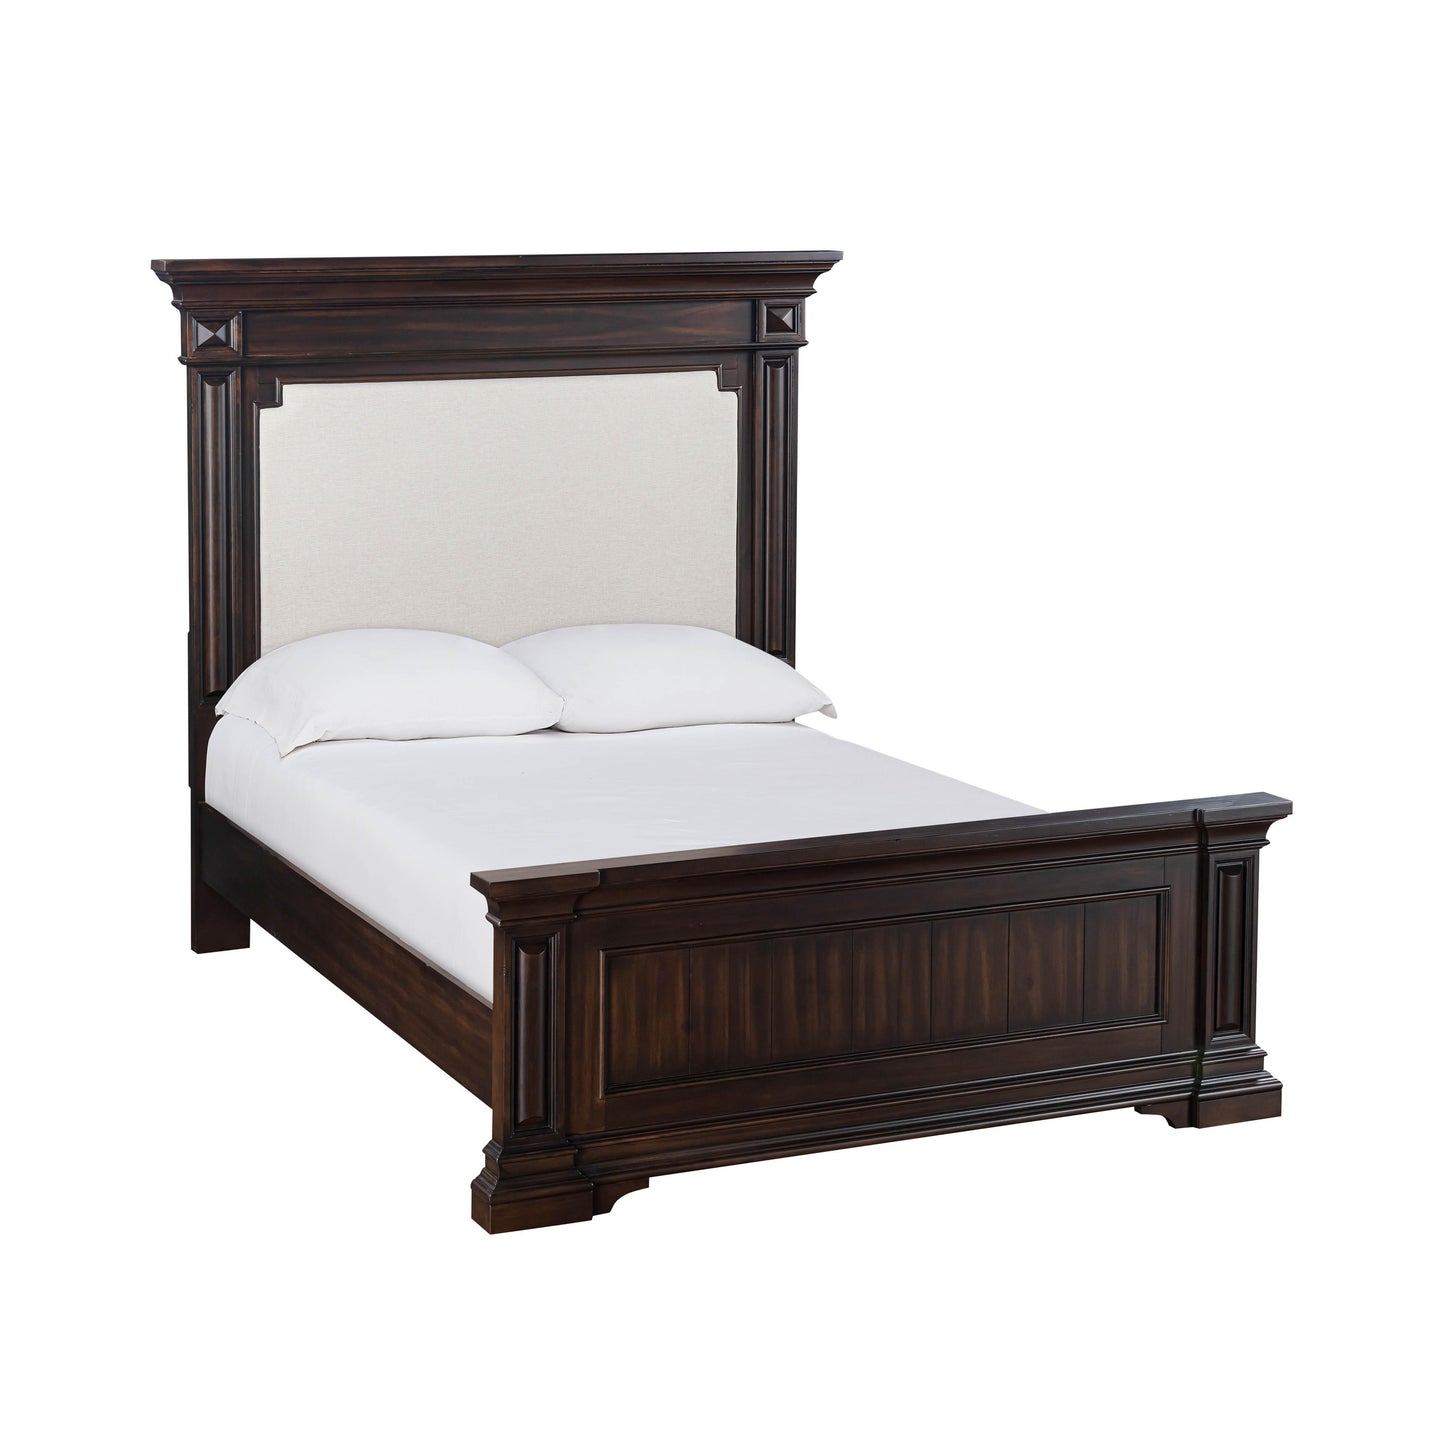 Tov Furniture Stamford Queen Upholstered Bed